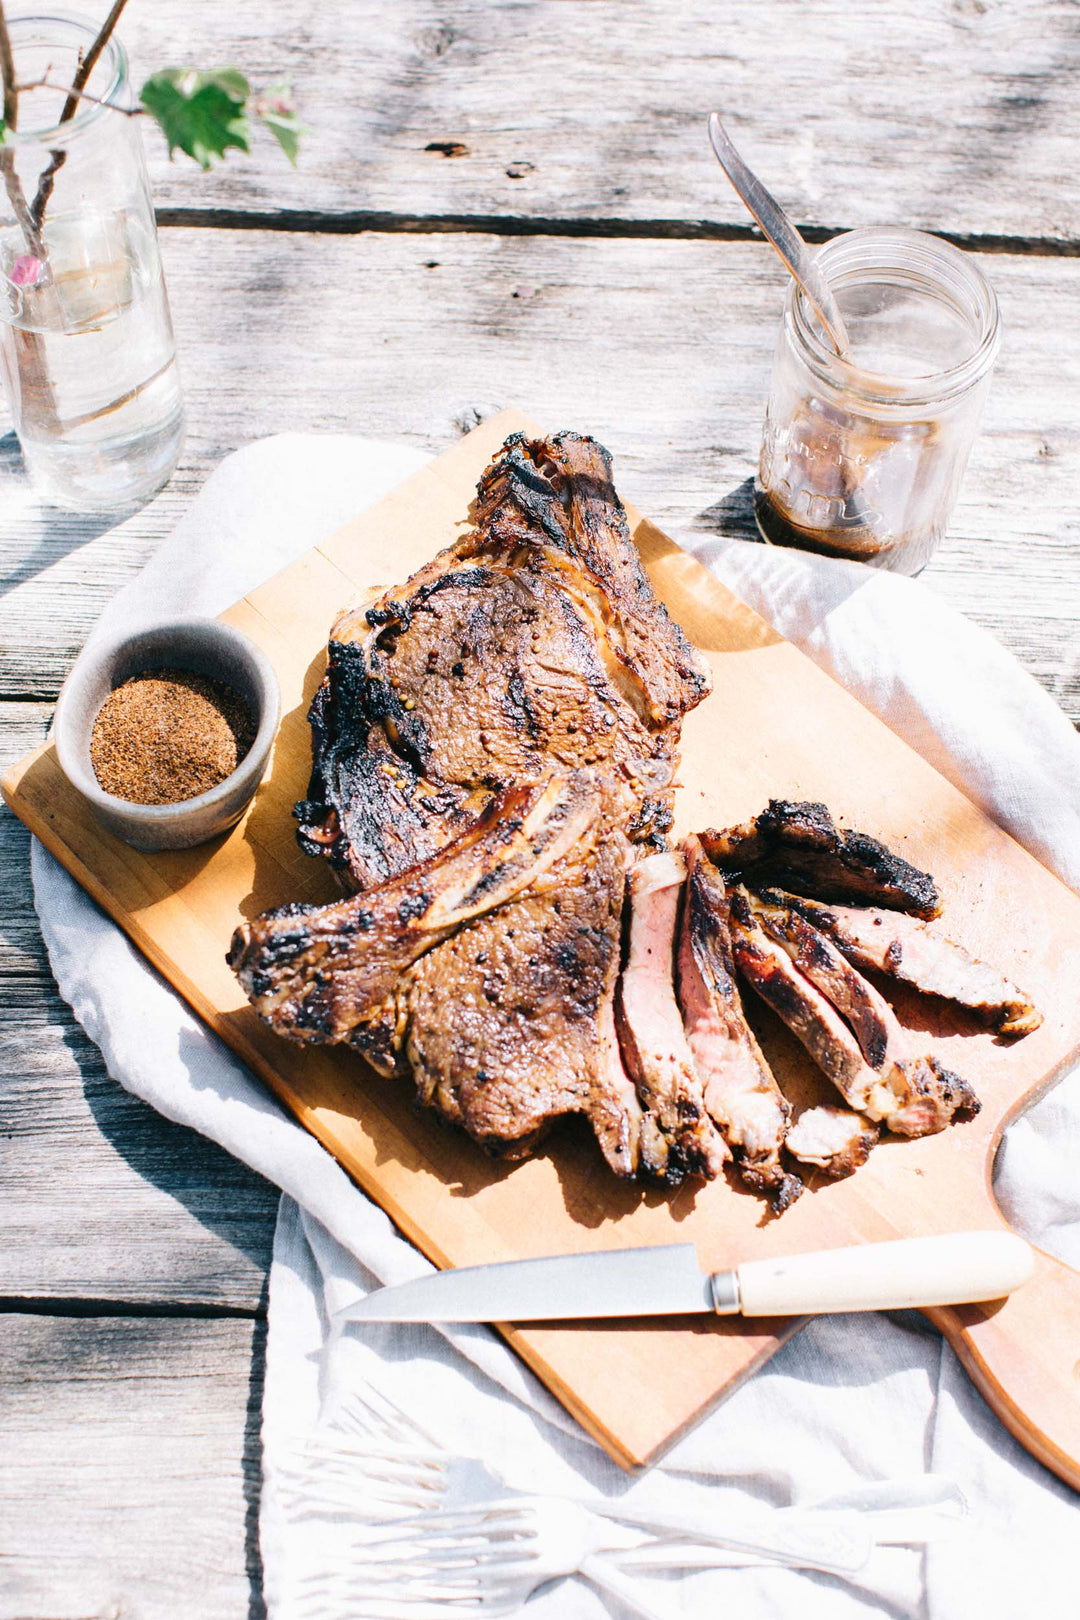 a sliced marinated rib steak on a wooden board placed on an outdoor picnic table